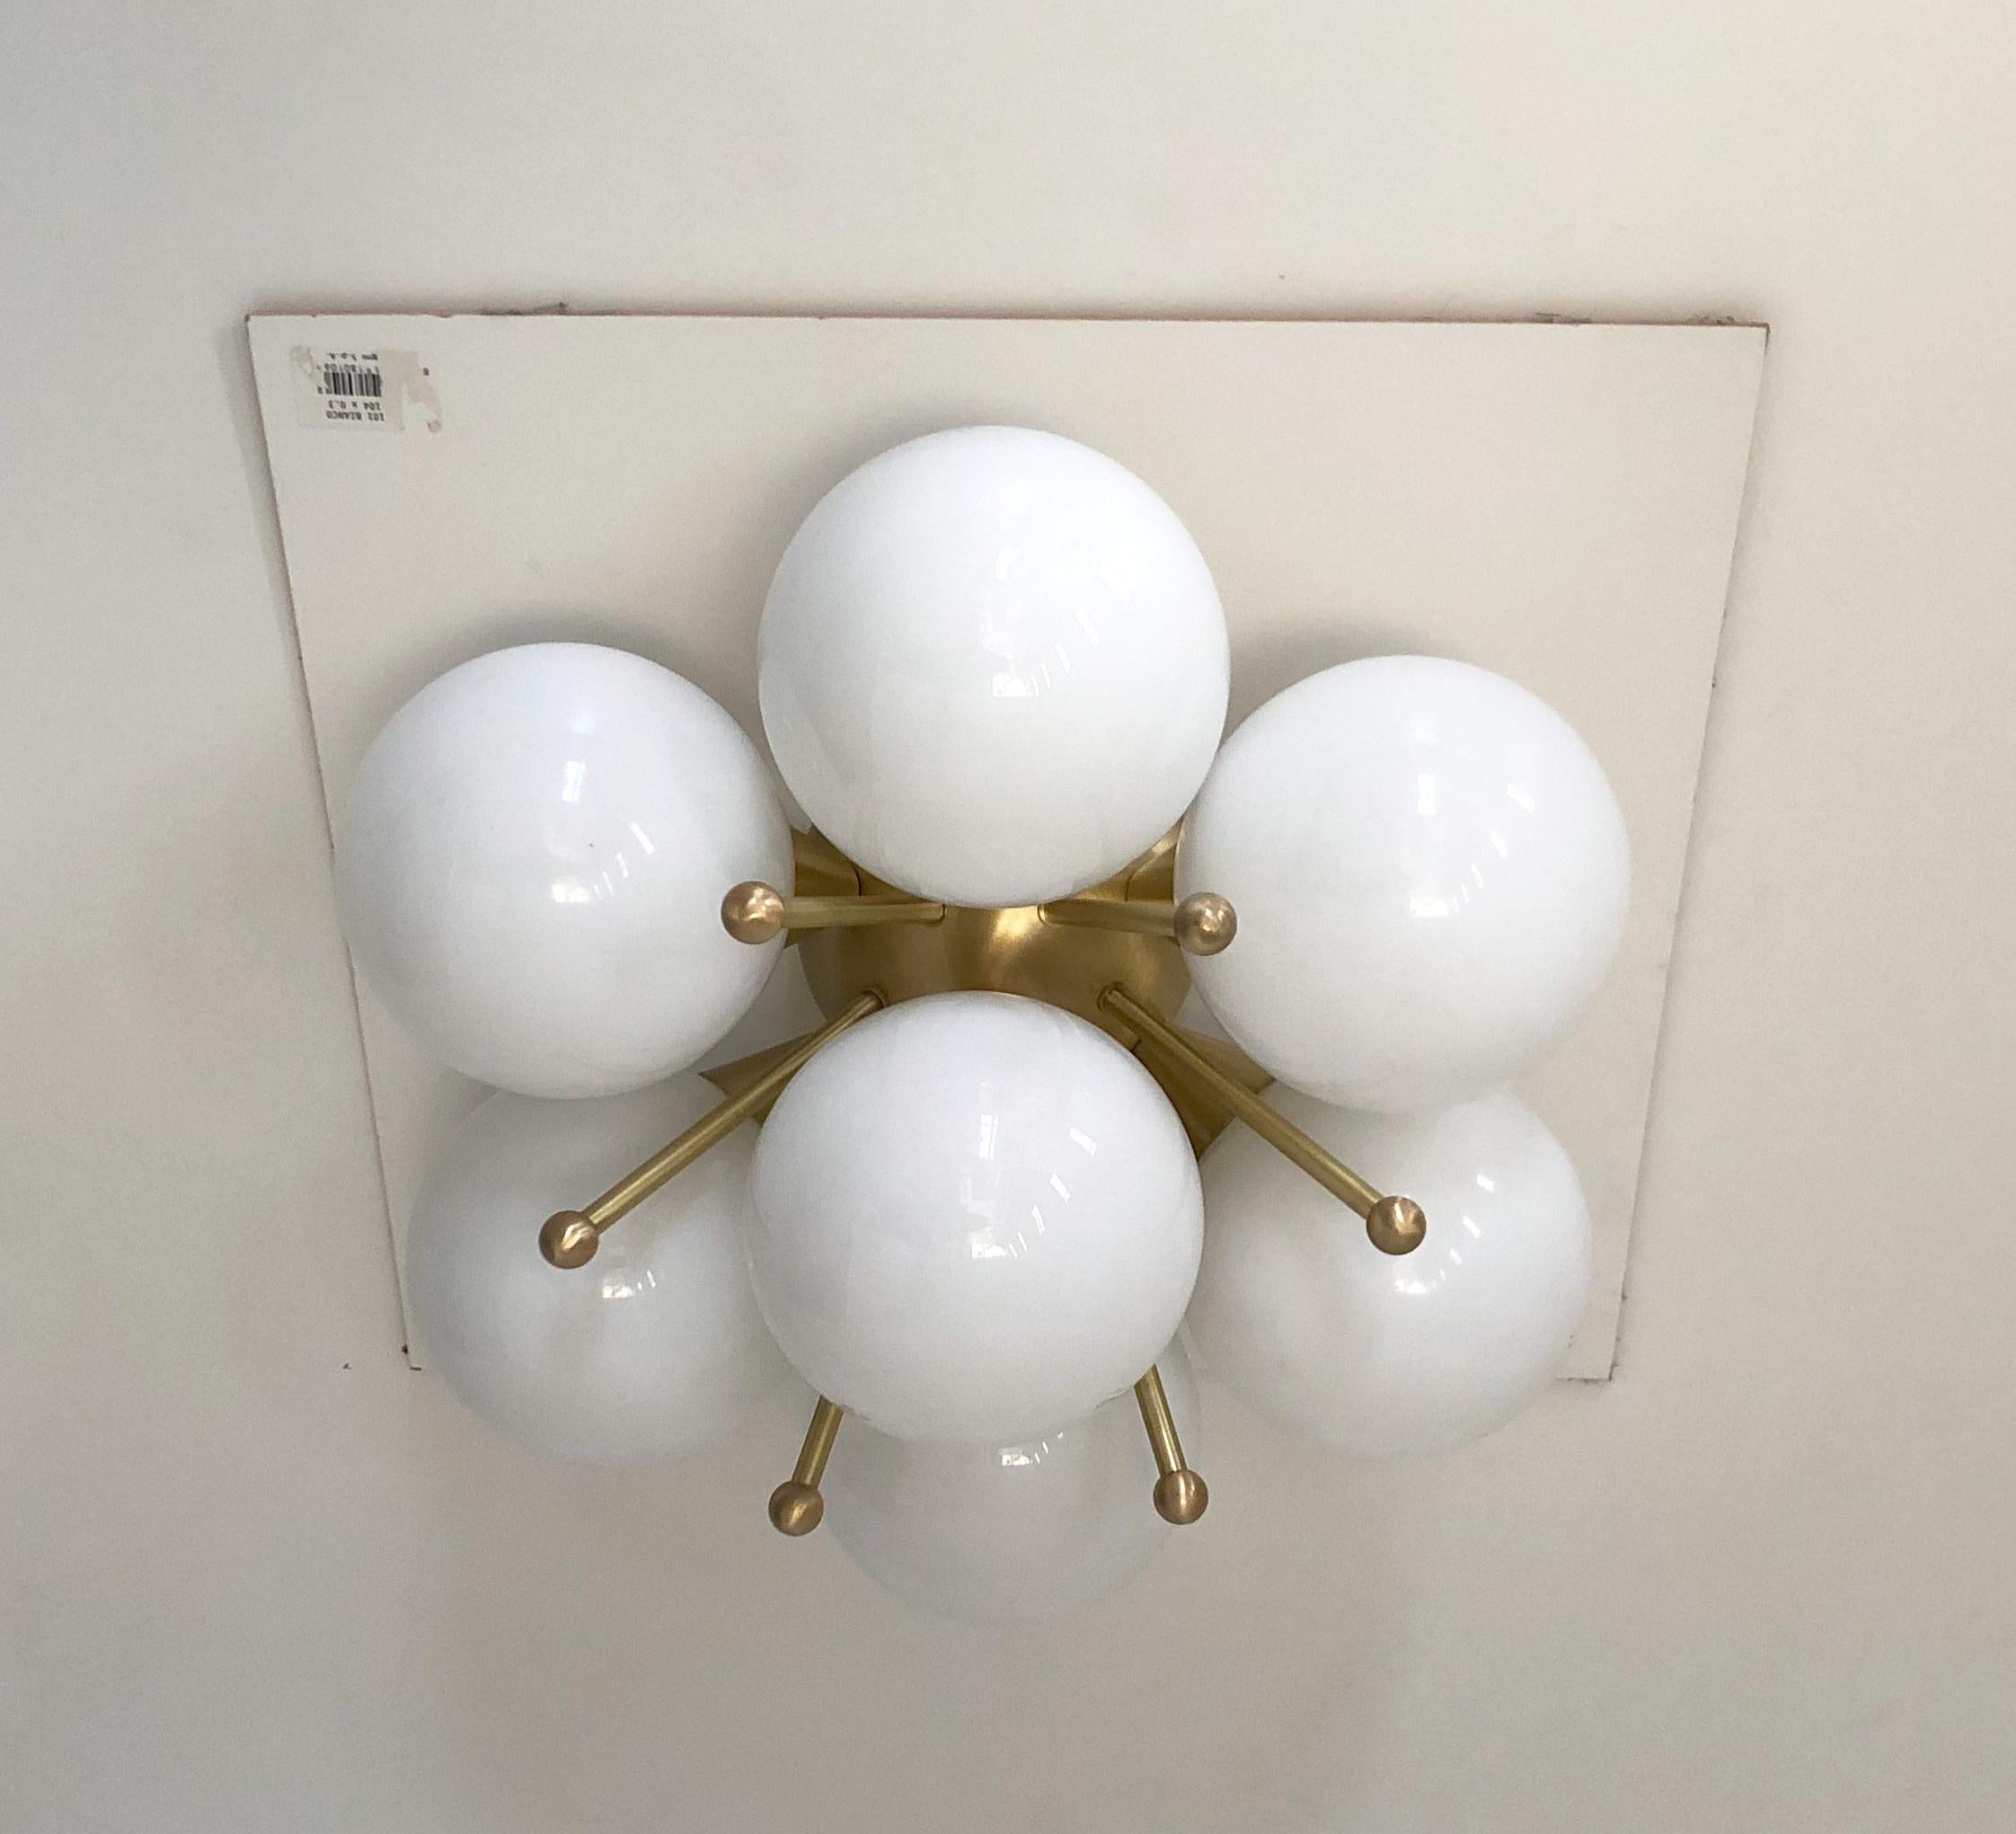 Italian flush mount with Murano glass globes mounted on solid brass frame
Designed by Fabio Bergomi / Made in Italy
7 lights / E12 or E14 type / max 40W each
Diameter: 22 inches / Height: 11 inches
Order only / This item ships from Italy

The